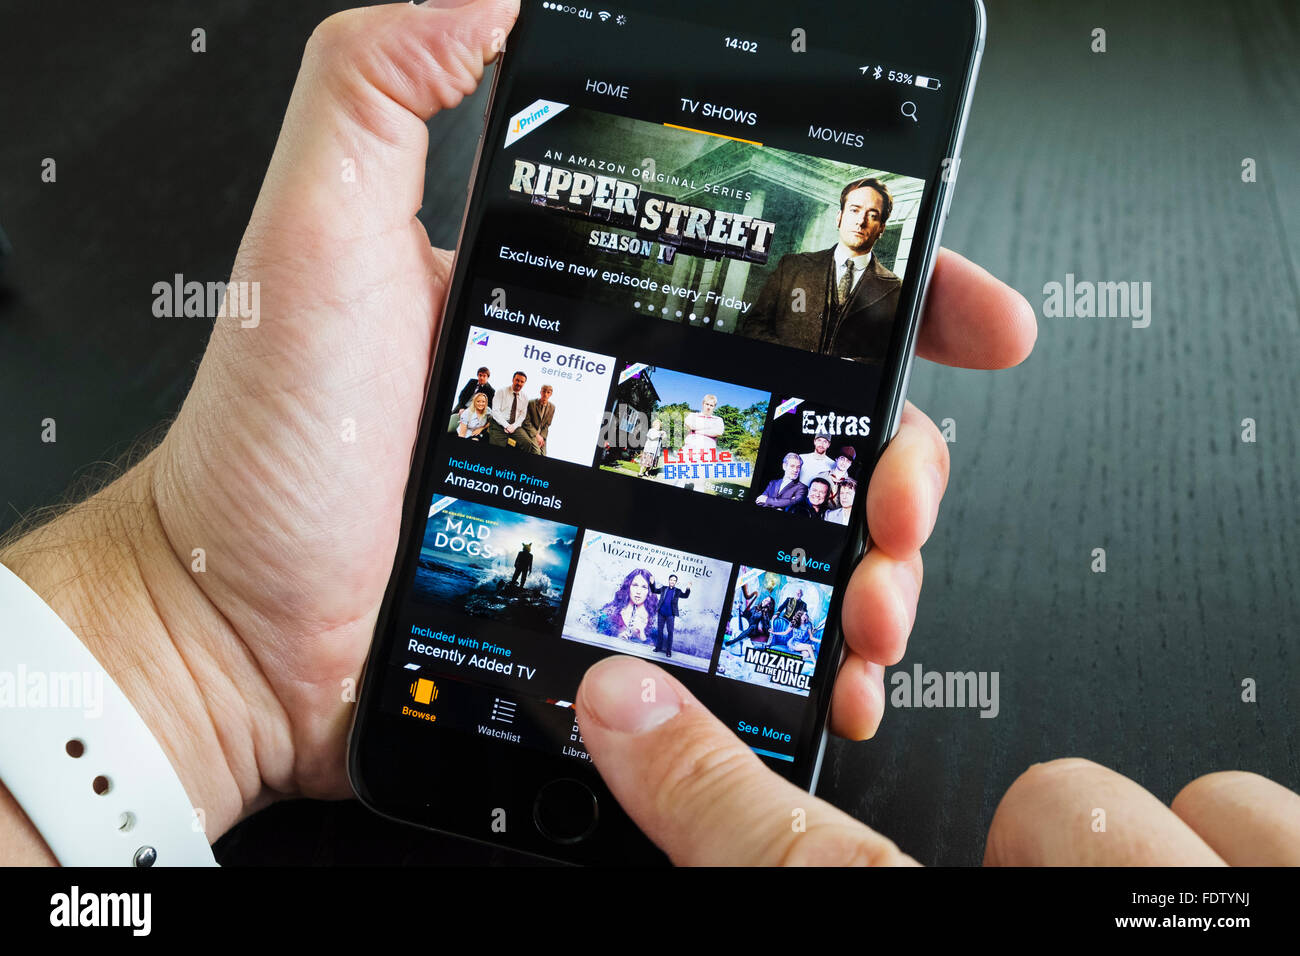 Homepage Of Amazon Prime Video Streaming Service On An Iphone 6 Plus Smart Phone Stock Photo Alamy